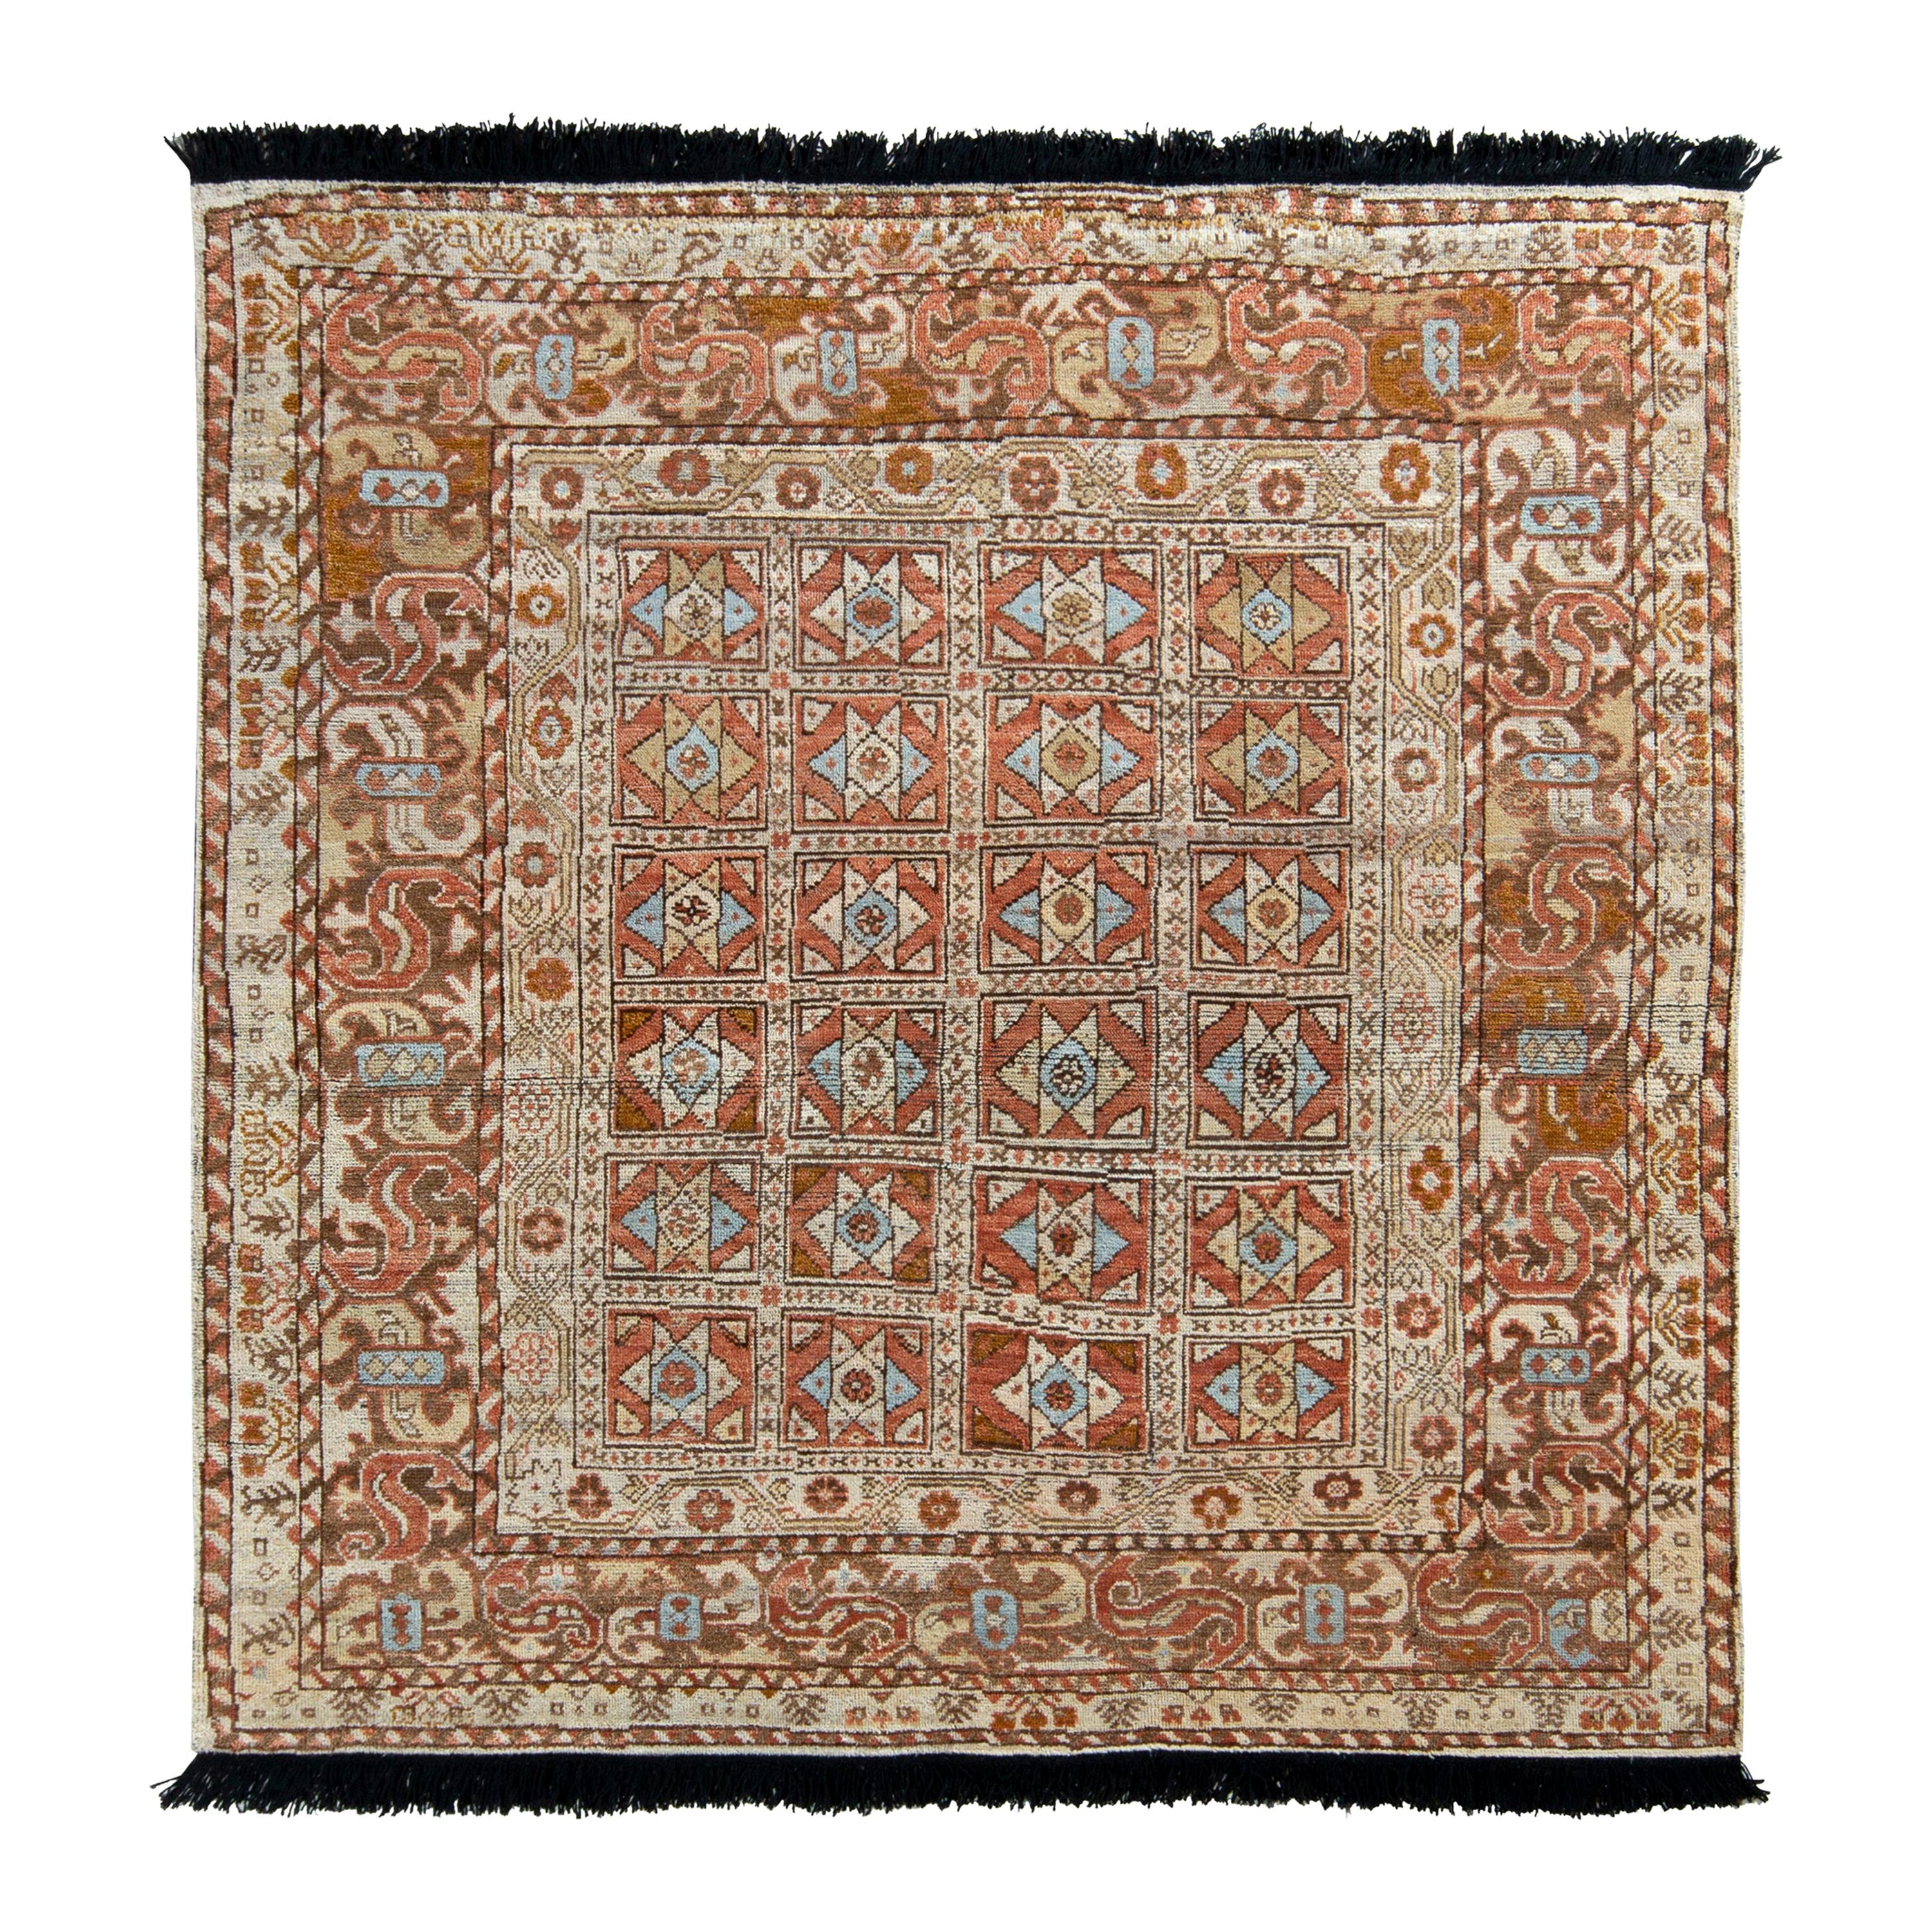 Rug & Kilim’s Tribal Style Rug in Beige-Brown All Over Geometric Pattern For Sale